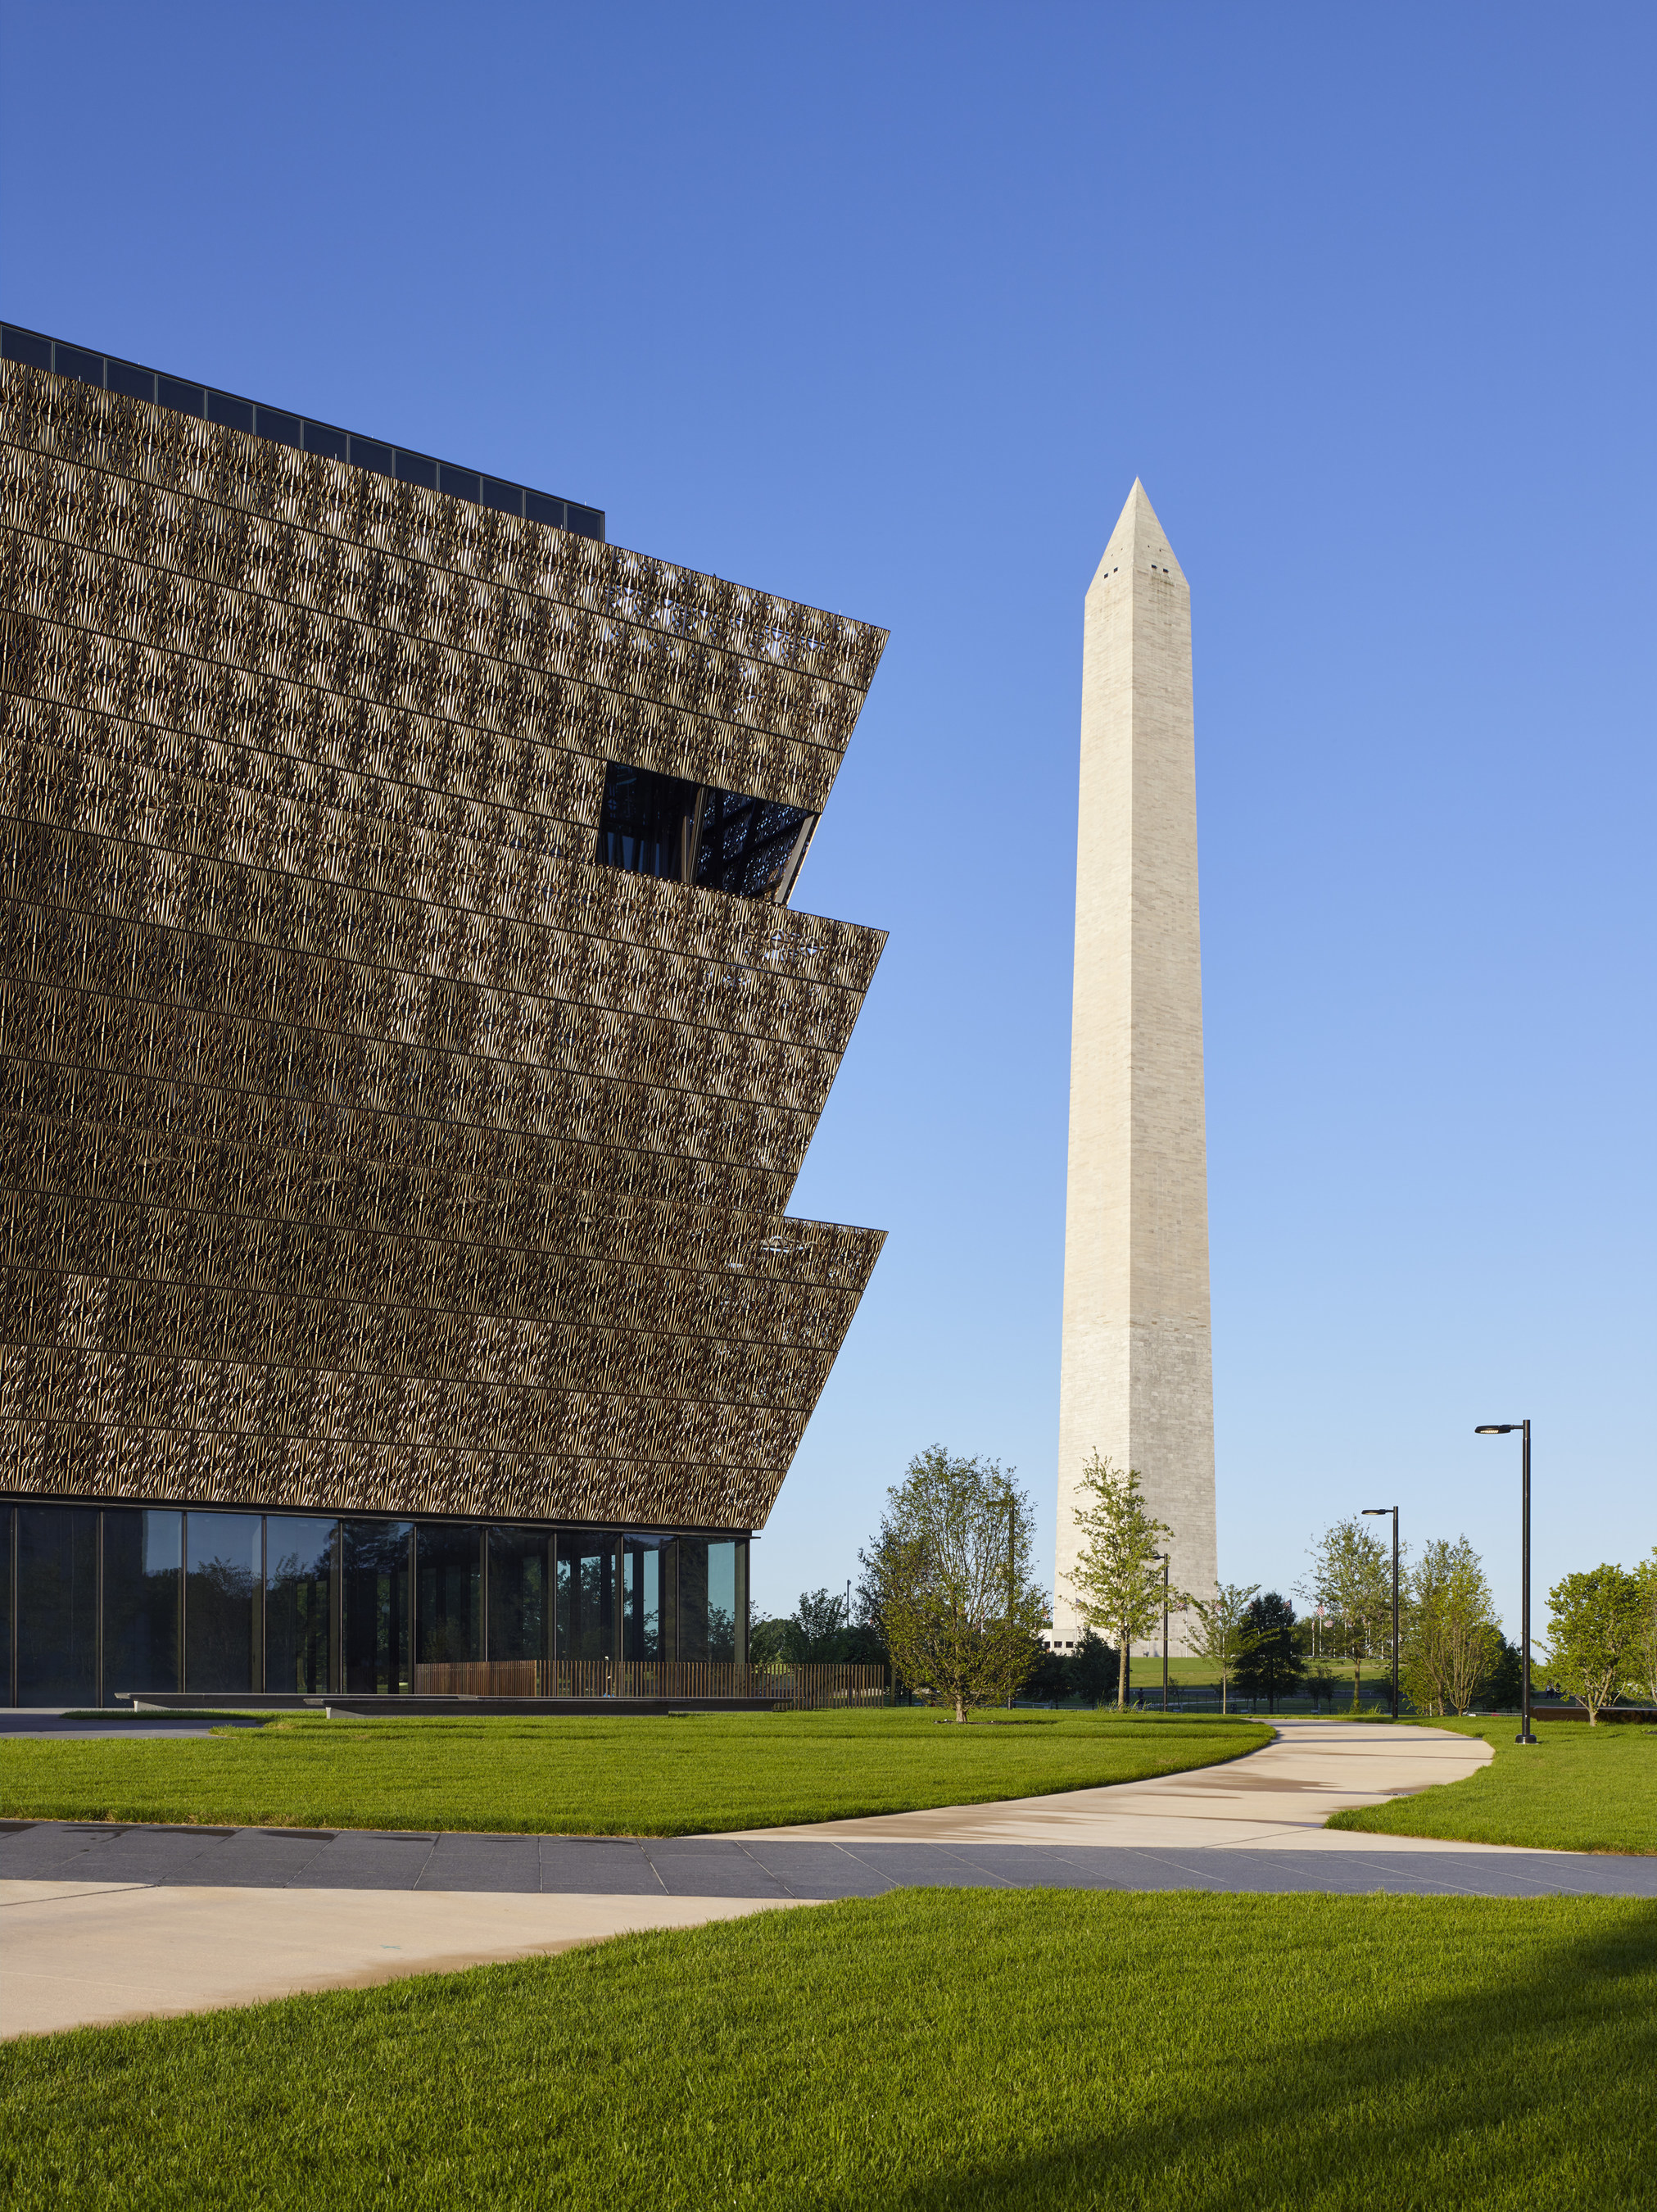 Lowe's donates $1 million to the Smithsonian's National Museum of African American History and Culture.